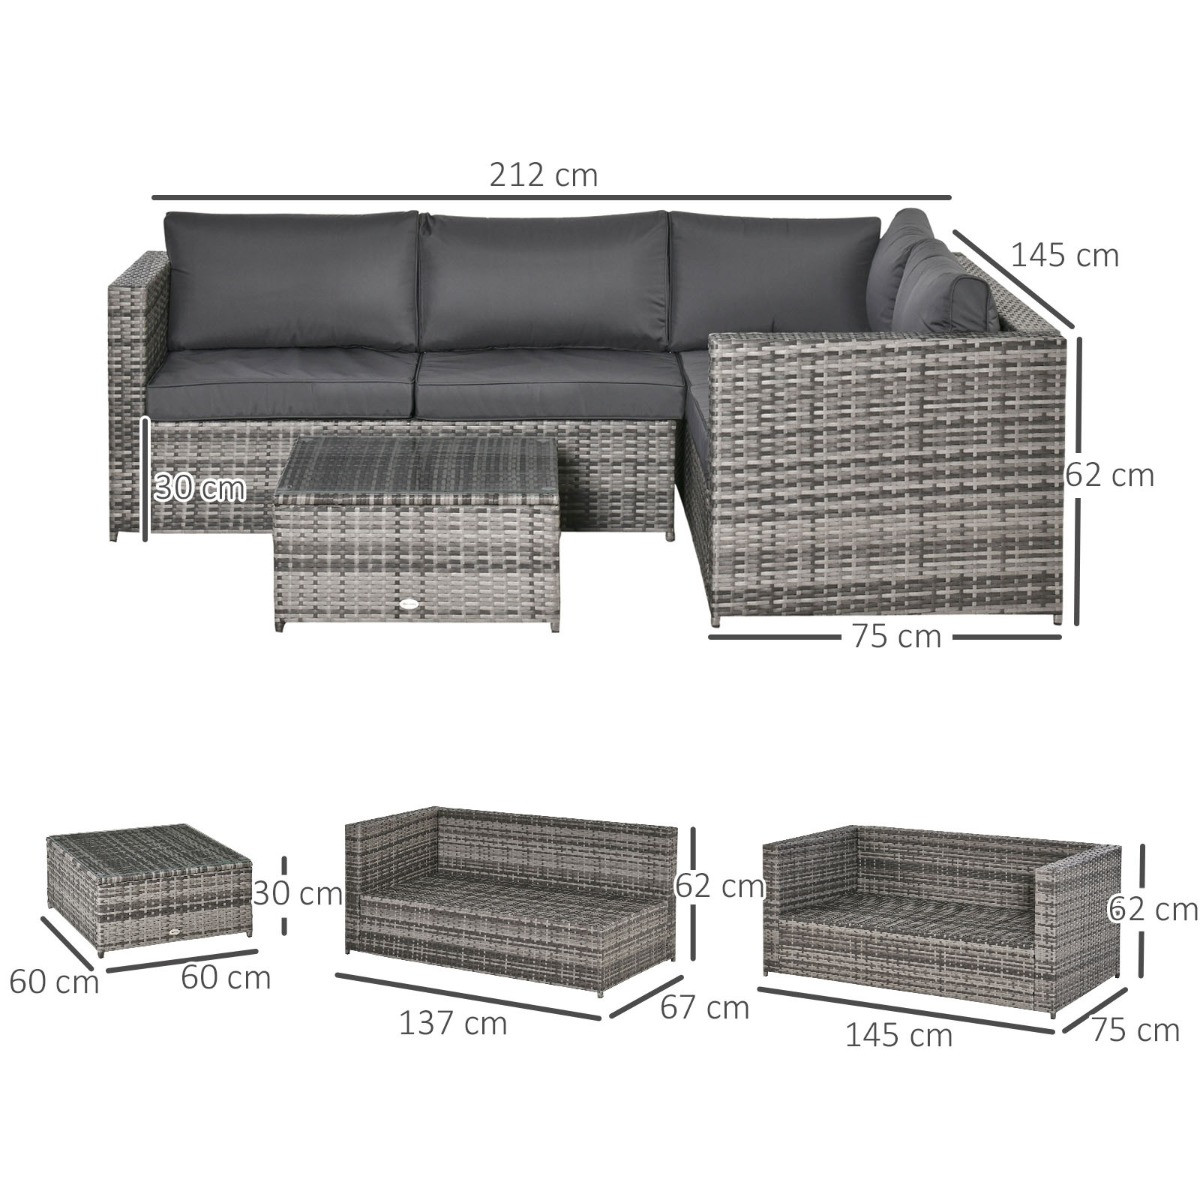 Outsunny Rattan Corner Sofa Set With Coffee Table, Grey - 4 Seater>